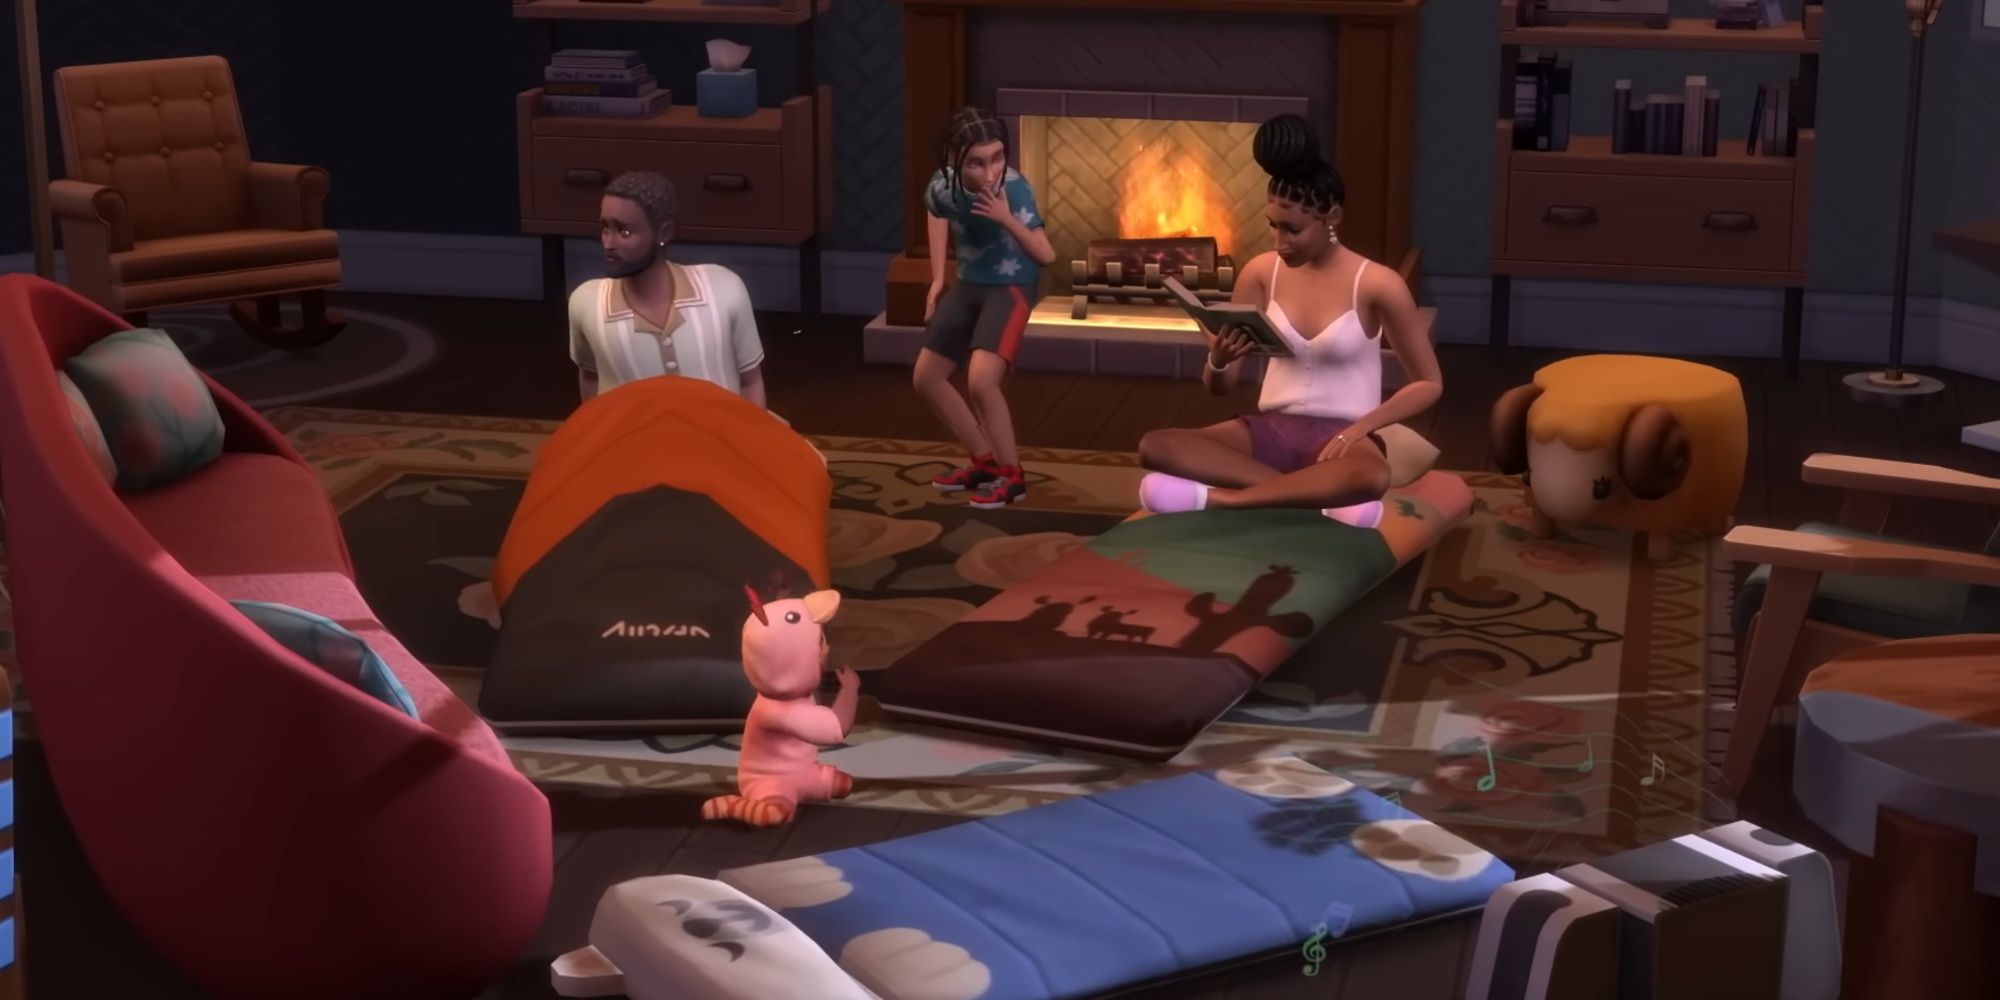 The Sims 4 Growing Together - A Sim family has a party in the living room